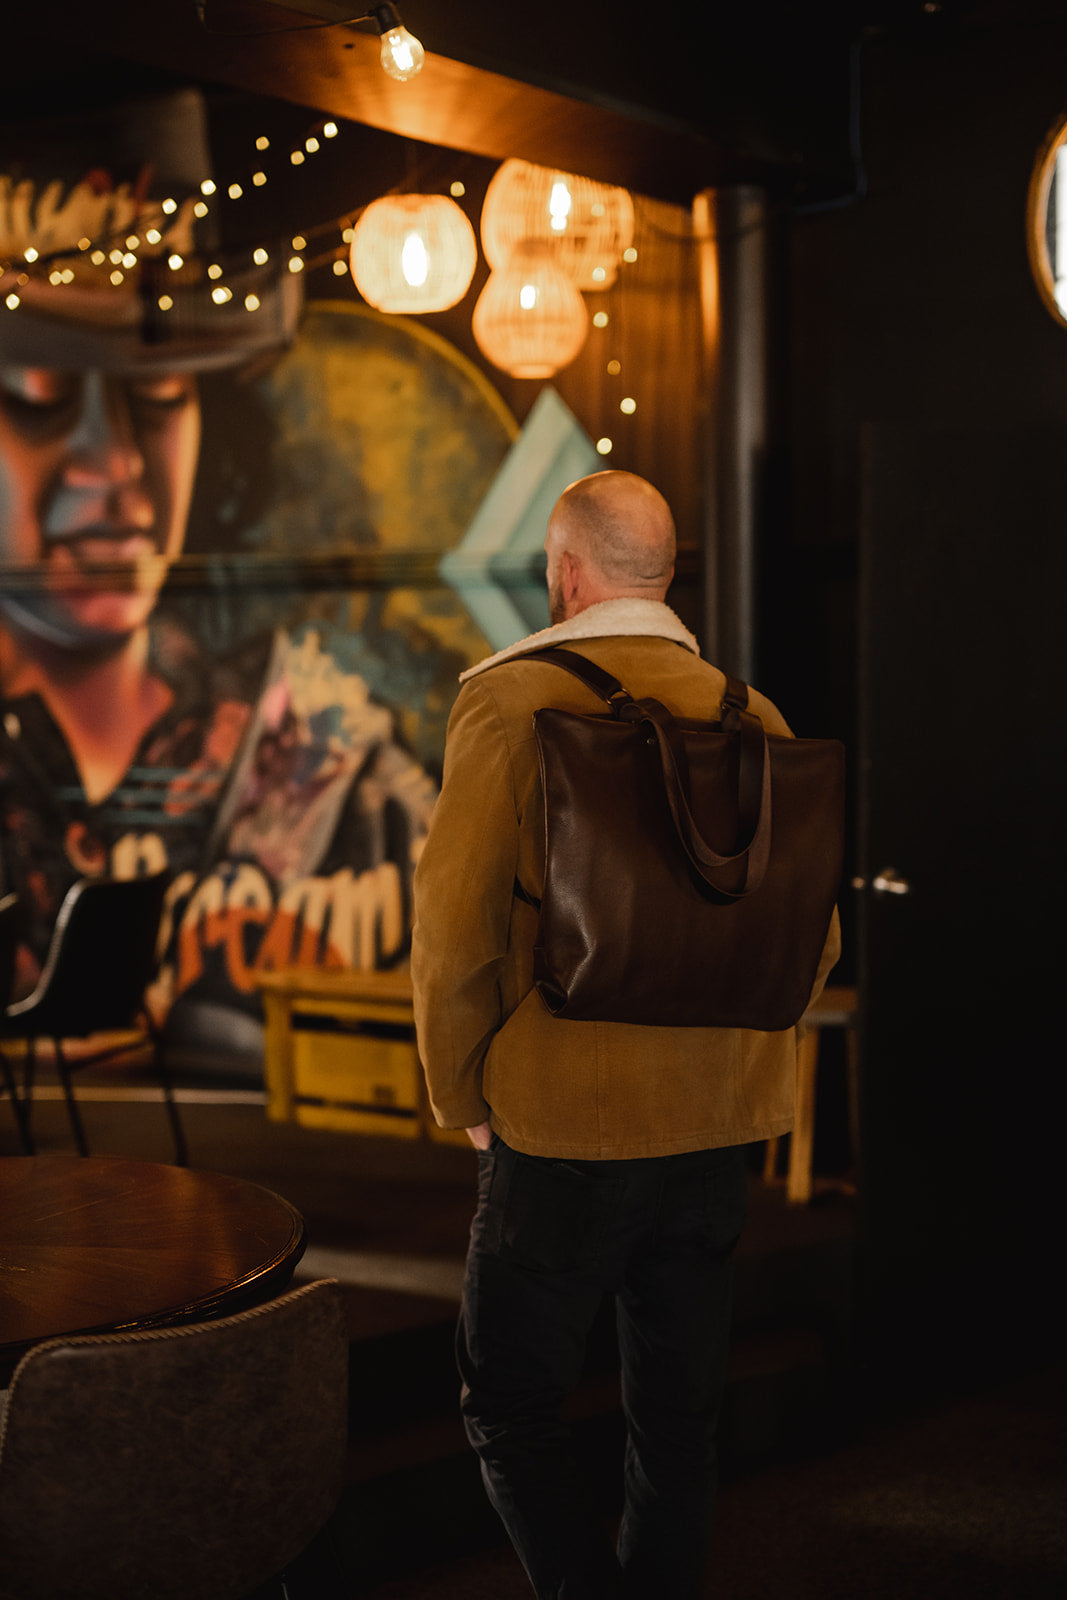 Man standing in low lit room with mural of a face on the wall. His back is turned and he is wearing a chocolate brown leather backpack. The bag is the Ella Jackson Chocolate Brown Leather Backpack & Tote